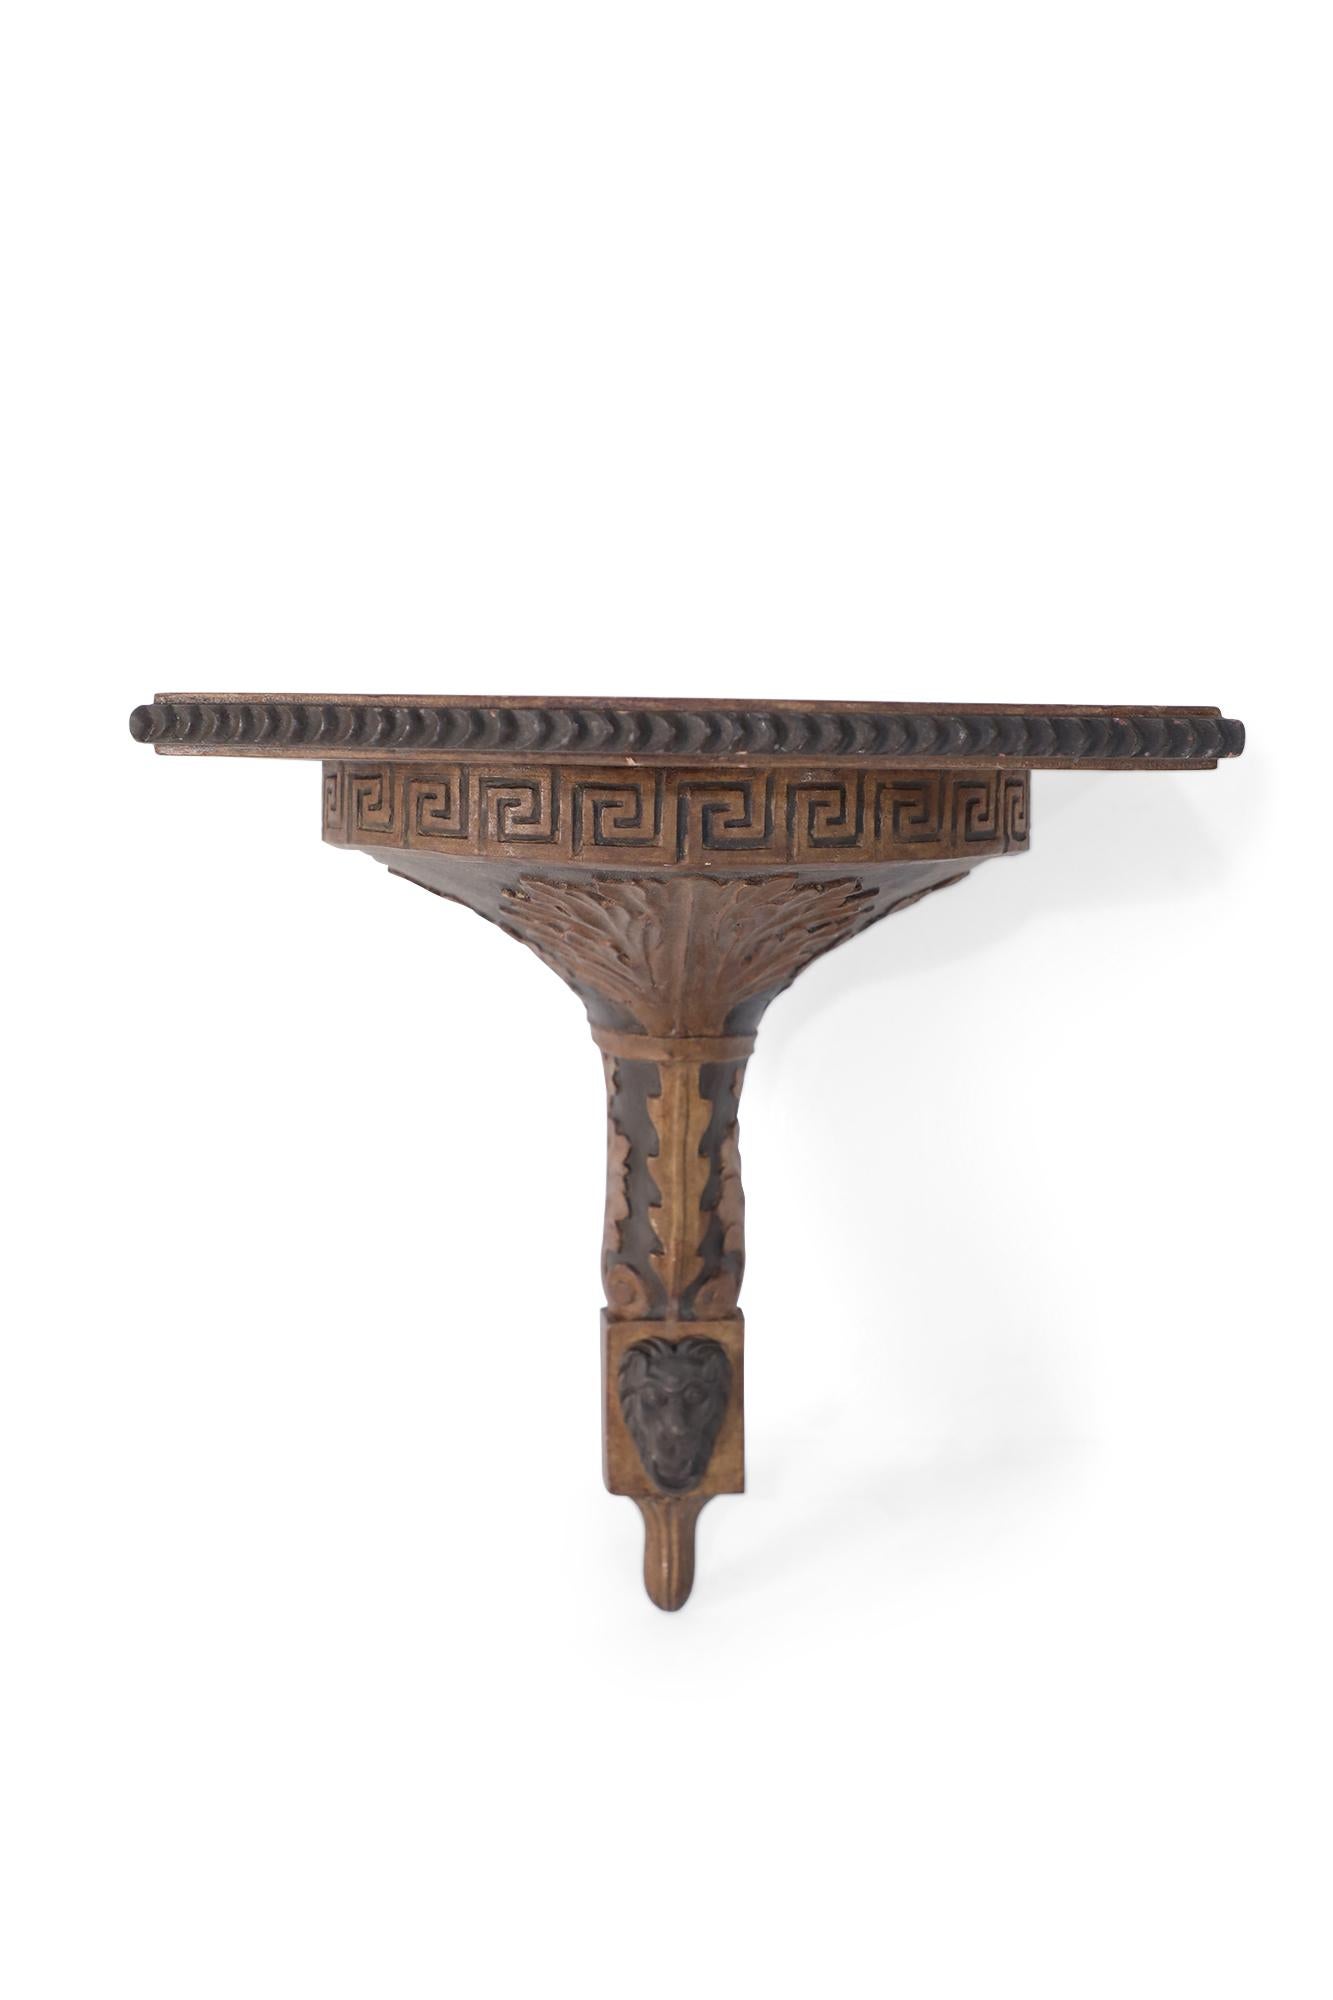 Pair of neoclassical-style carved wooden wall shelves with demilune tops, with a notch-carved lip over a carved Greek key top border and decorative acanthus leaves.